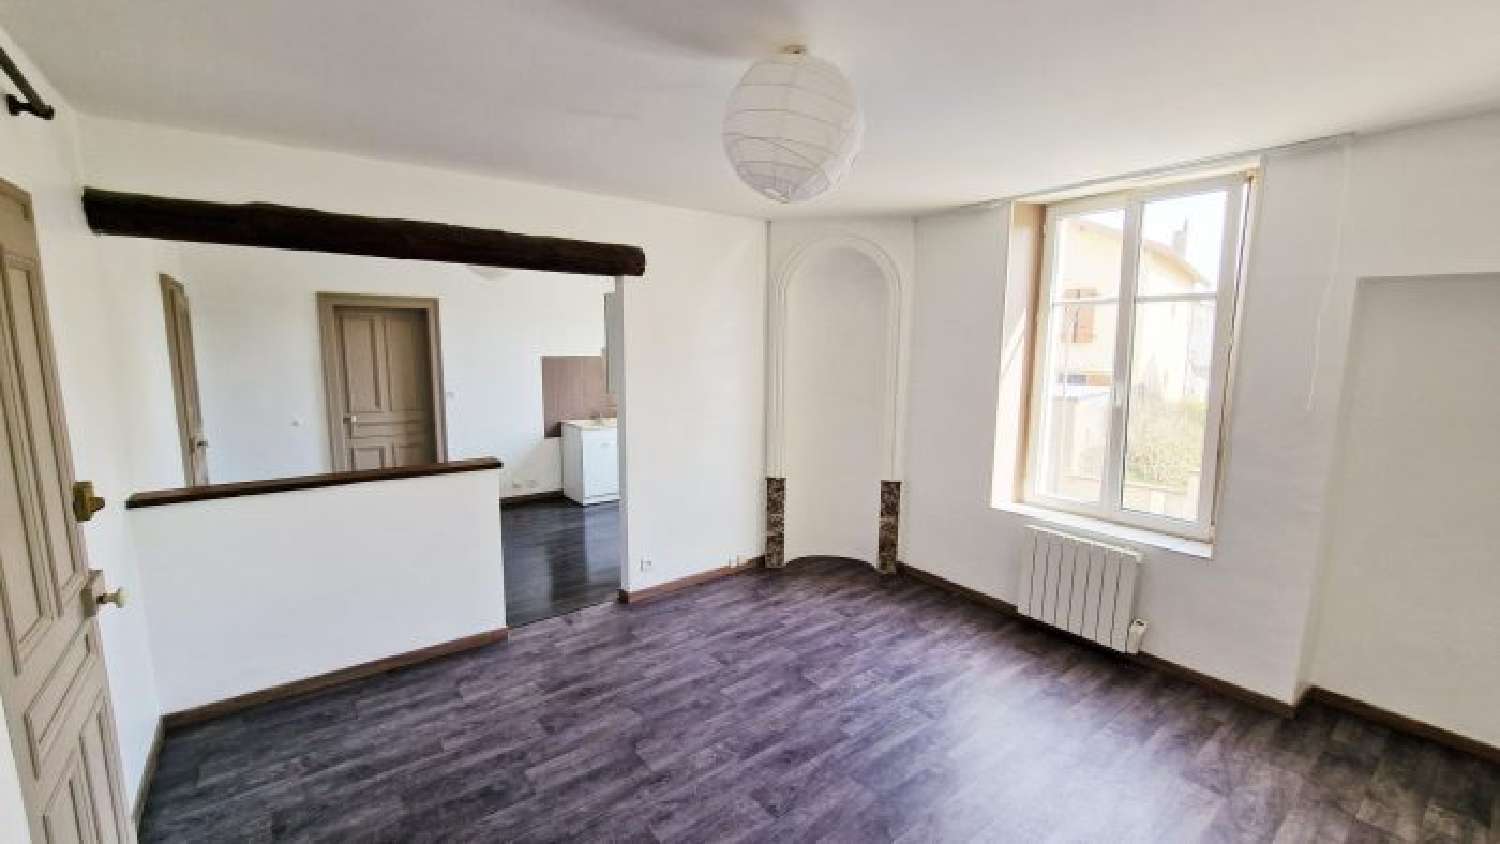  kaufen Wohnung/ Apartment Pagny-sur-Moselle Meurthe-et-Moselle 4